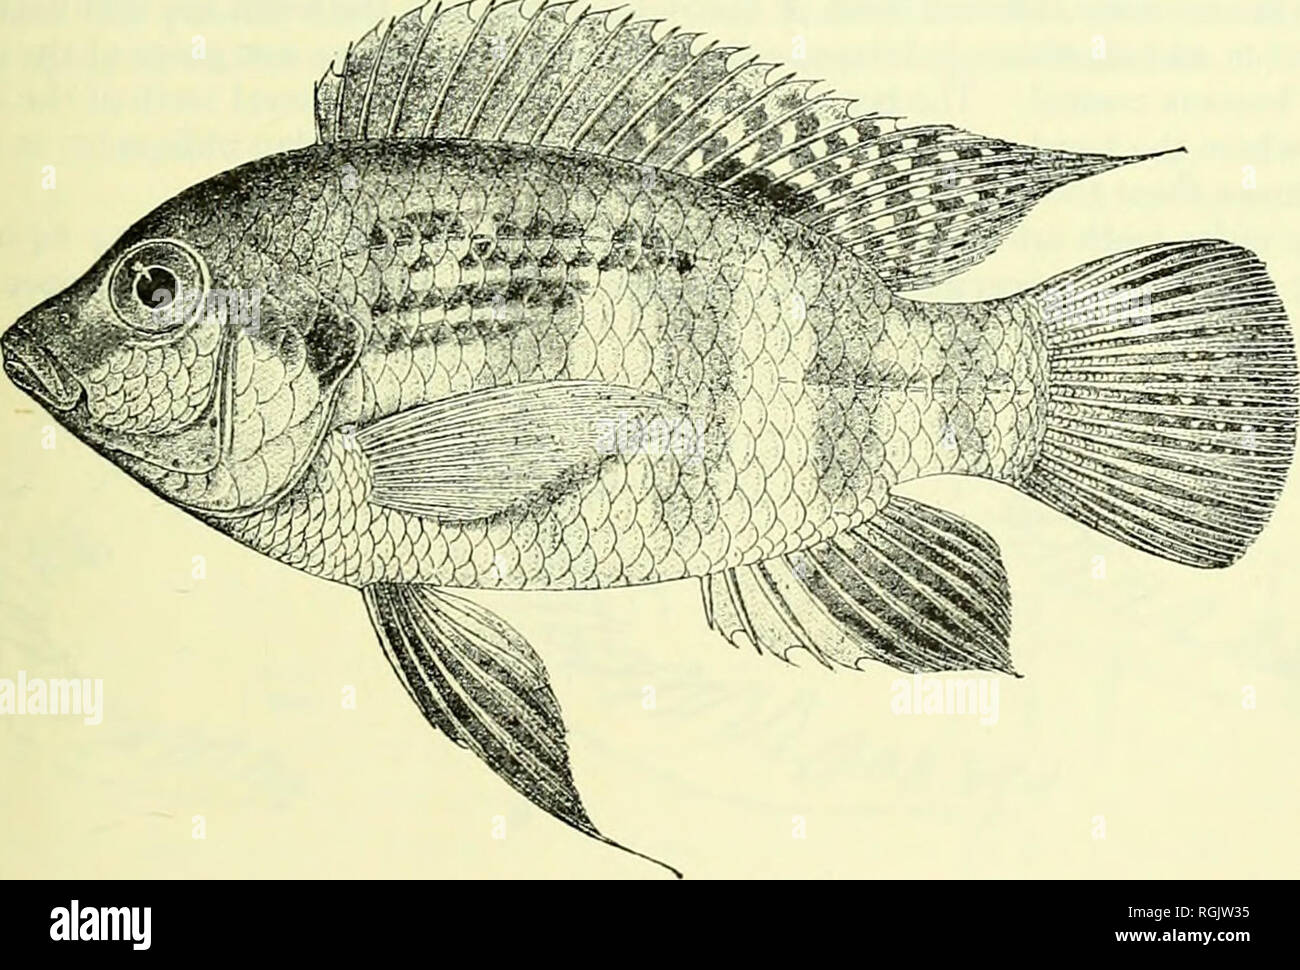 . Bulletin of the British Museum (Natural History). PELMATOCHROMIS, TILAPIA AND SAROTHERODON 5 An intense opercular spot; a tilapia-mark on base of dorsal at junction of spinous and soft parts. The distinguishing characters and synonymies are as follows. P. ocellifer Boulenger, 1899 : 104; id. igoi : 421; id. 1915 : 391 fig. 264. Paratilapia nigrofasciata (nee Pellegrin); Steindachner, 1914 : 54 (R. Ja). HoLOTYPE. BM(NH) 1898.7.9.16, 64-5 mm inSL, from Monsembe (Mosembe), Middle Congo, ca.iÂ°2o' N, 19Â° E. coll. J. E. Weeks. Teeth unicuspid, curved cones at all known stages, in bands 3-5 teeth Stock Photo